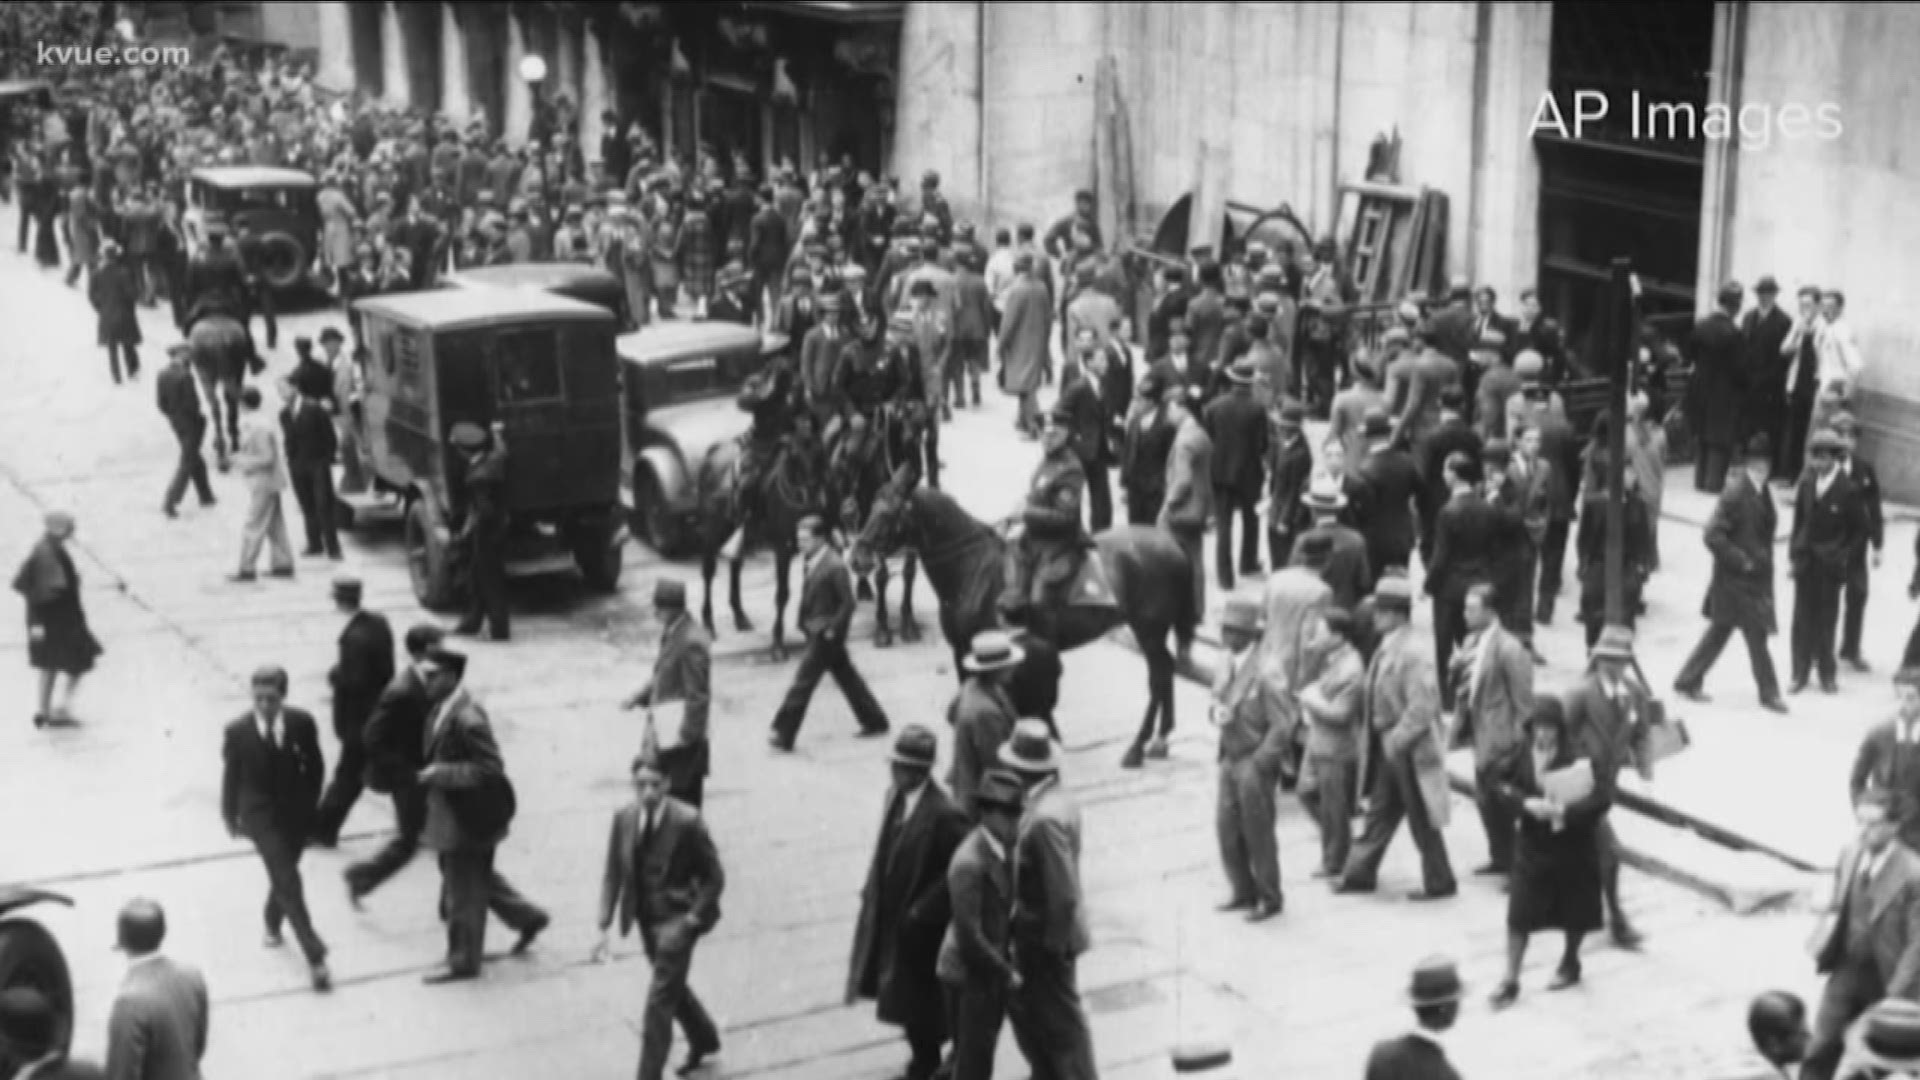 Unemployment numbers are high, leading some to compare these times to the Great Depression. But economists say that comparison is far from accurate.